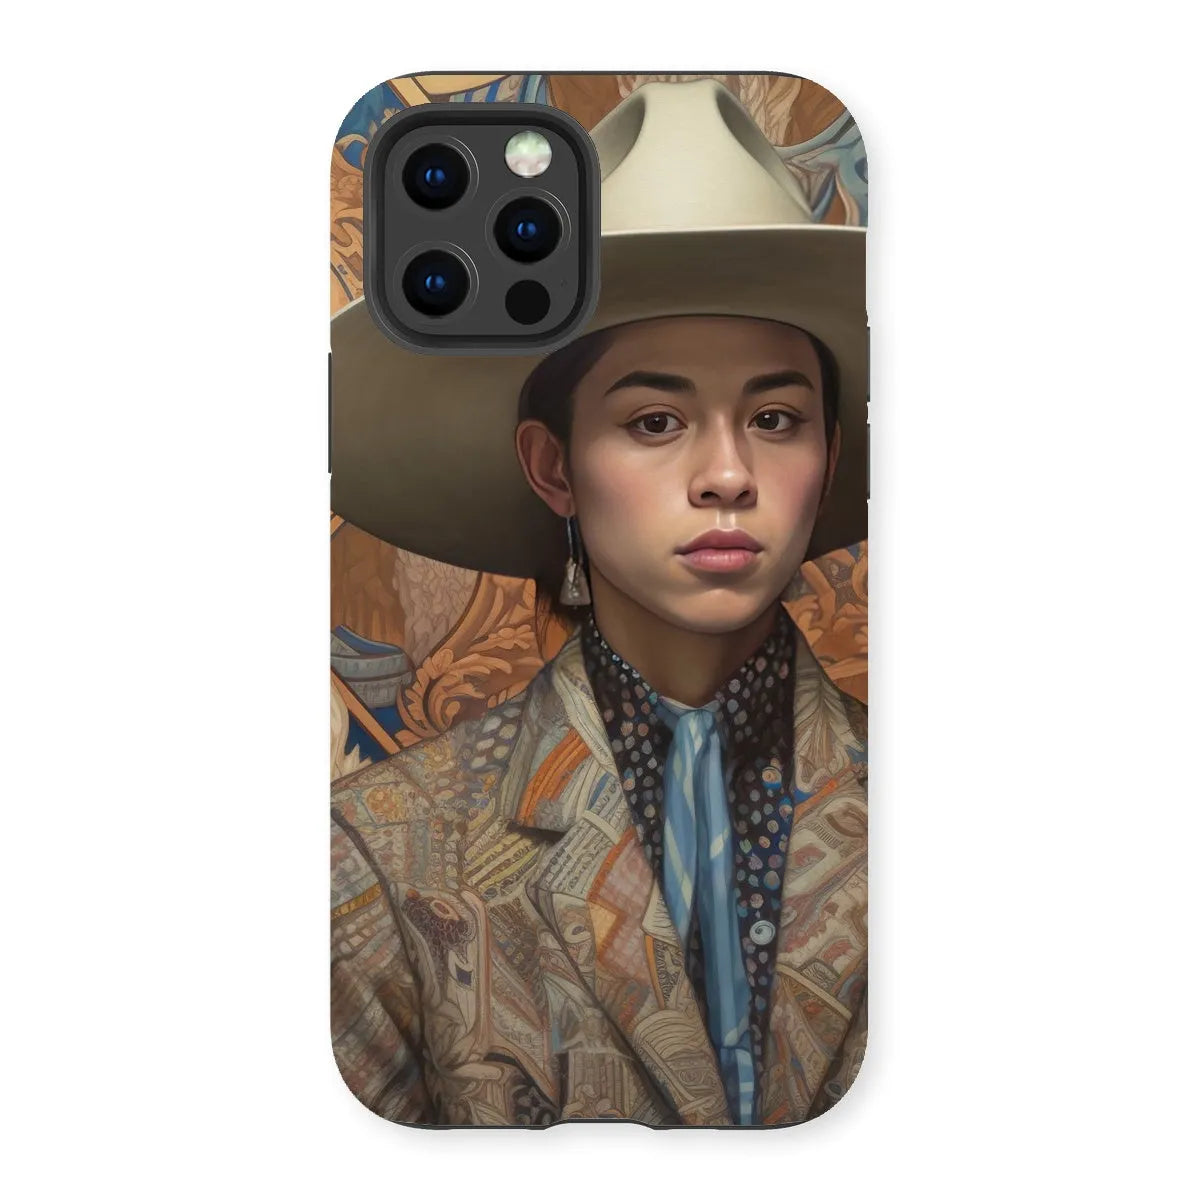 Angel The Transgender Cowboy - F2m Outlaw Art Phone Case - Iphone 13 Pro / Matte - Mobile Phone Cases - Aesthetic Art